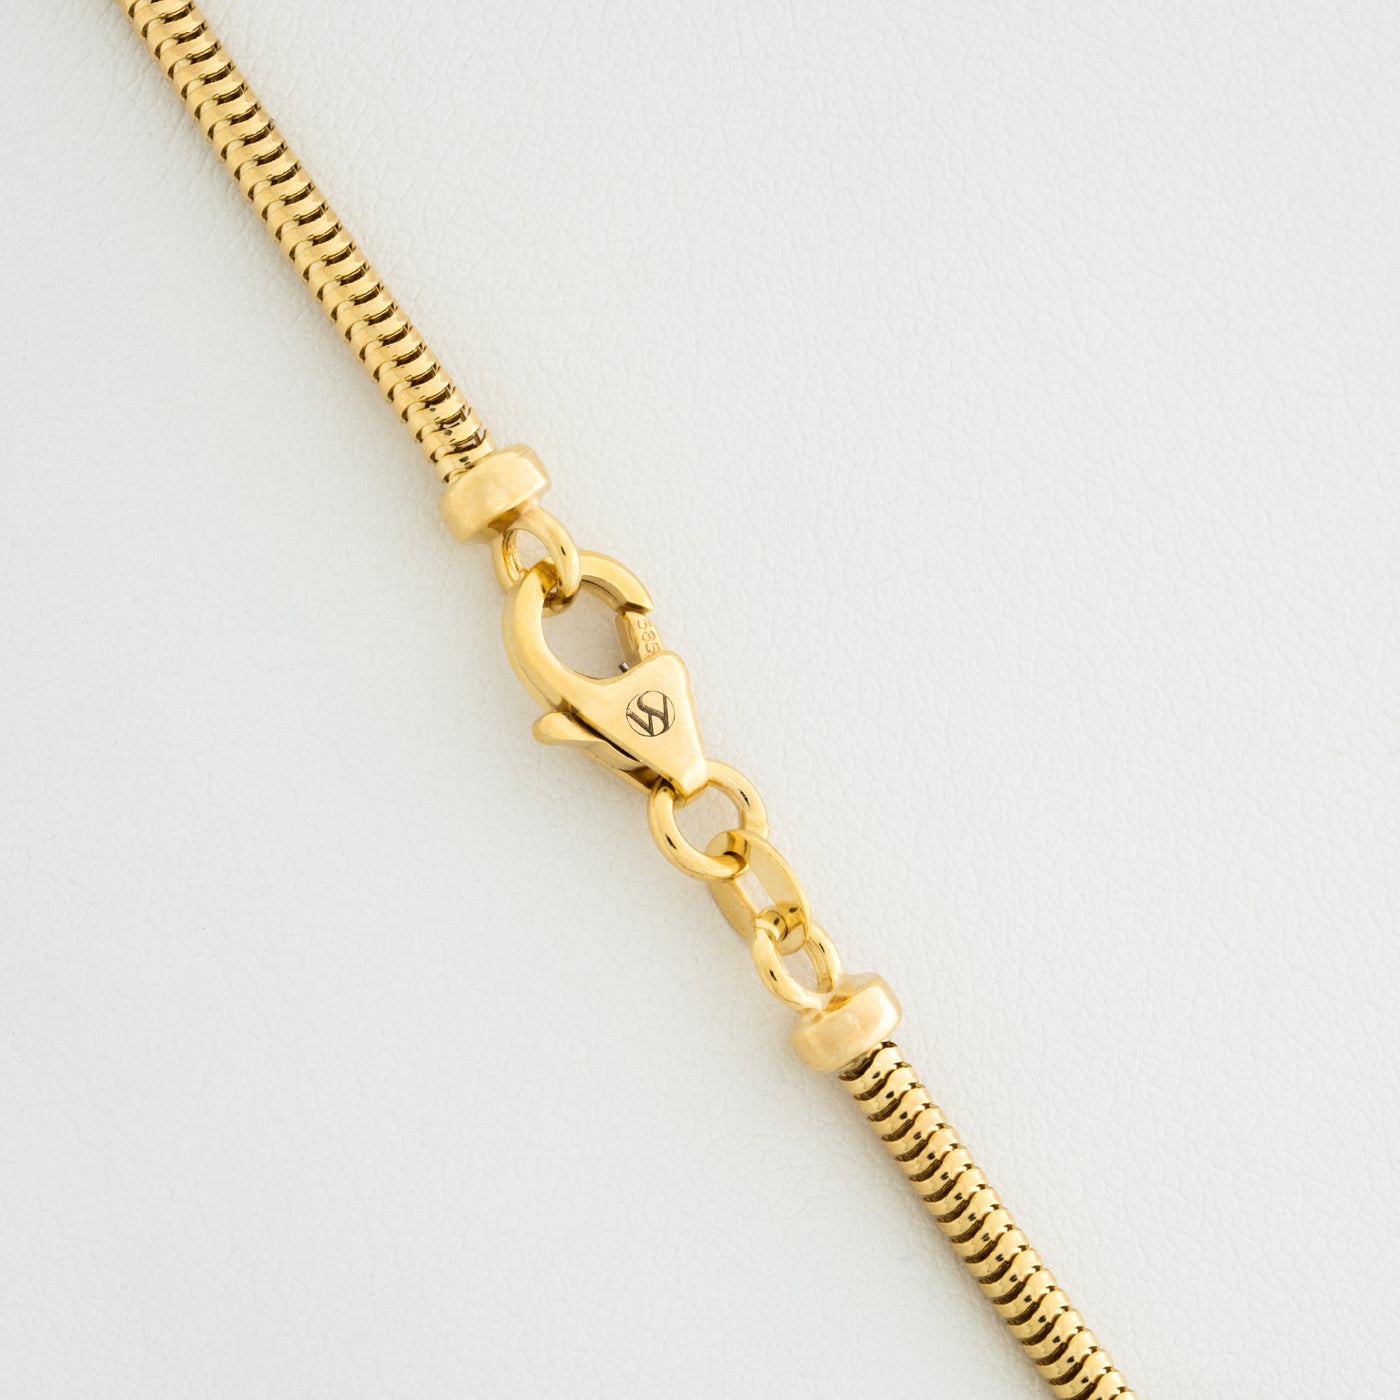 14K SOLID GOLD SNAKE CHAIN